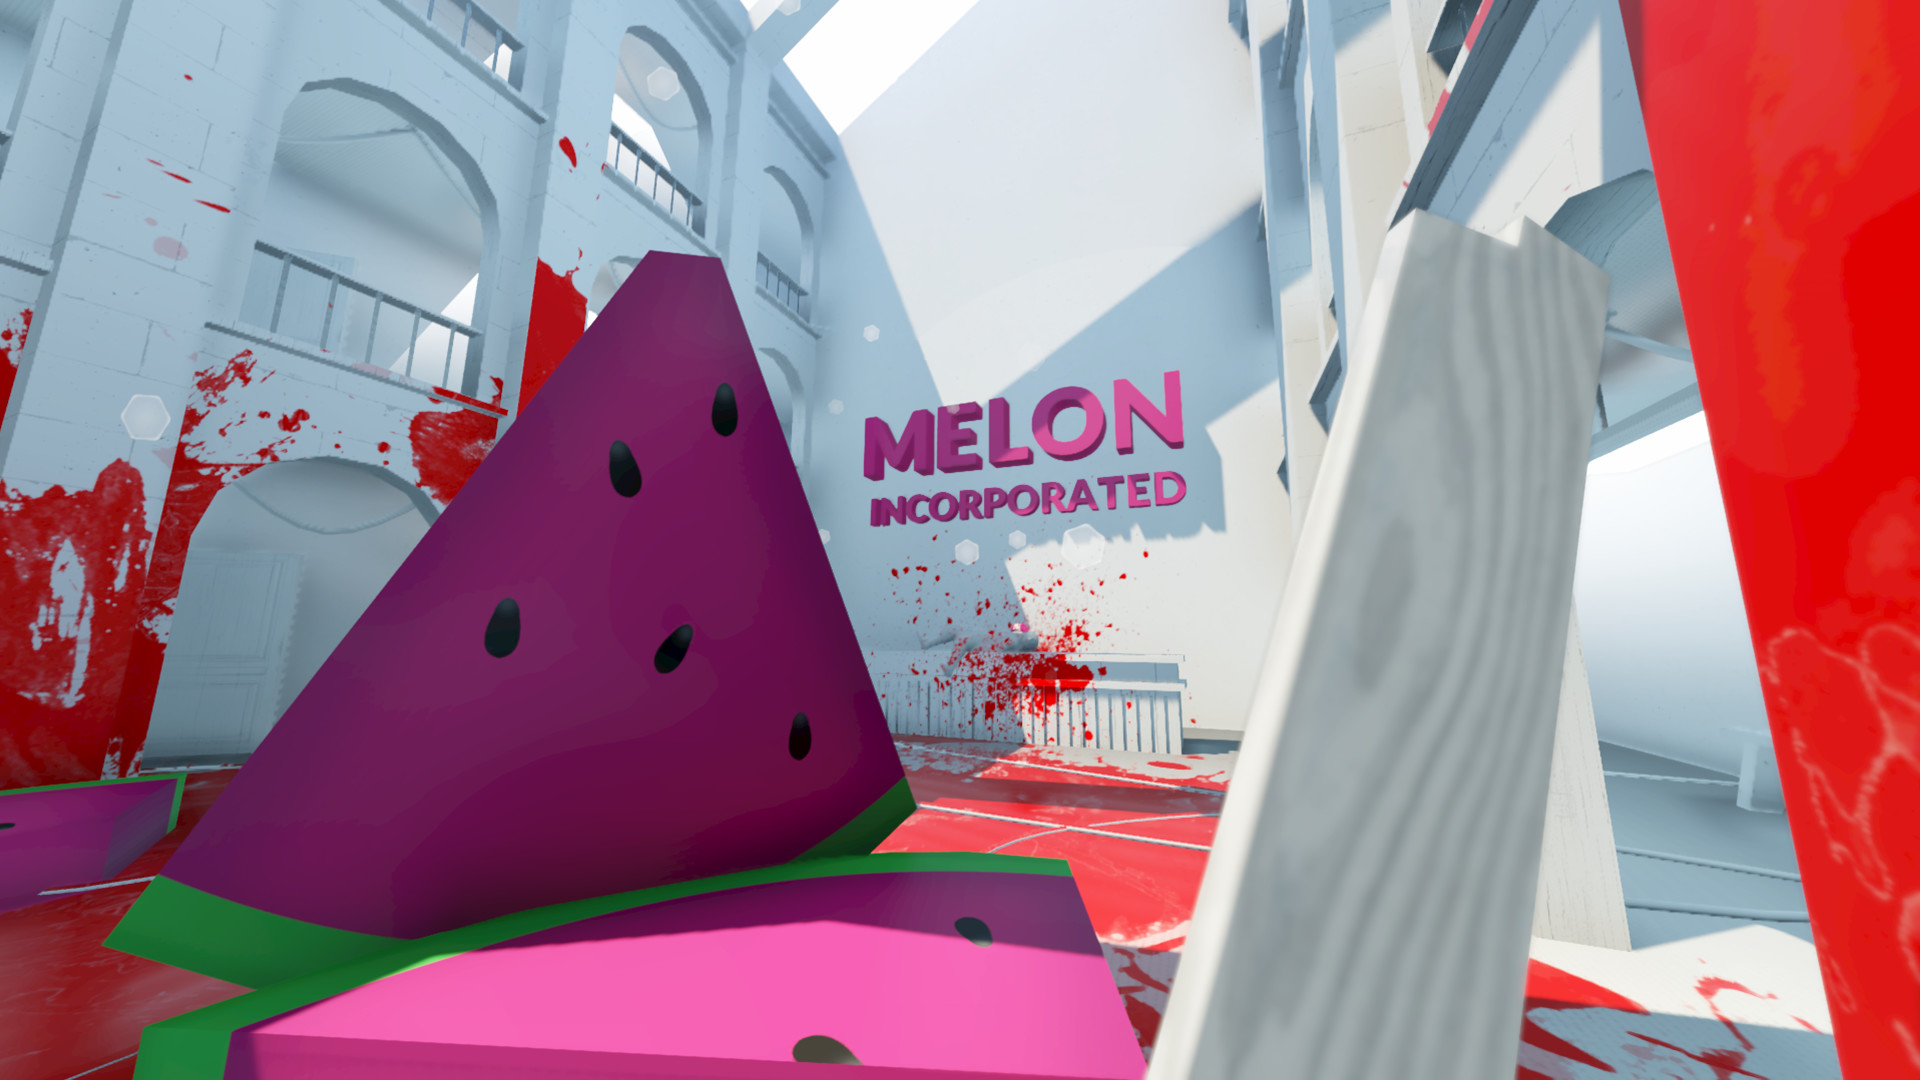 Melon Playground 2 Game Online Play for Free 🕹️